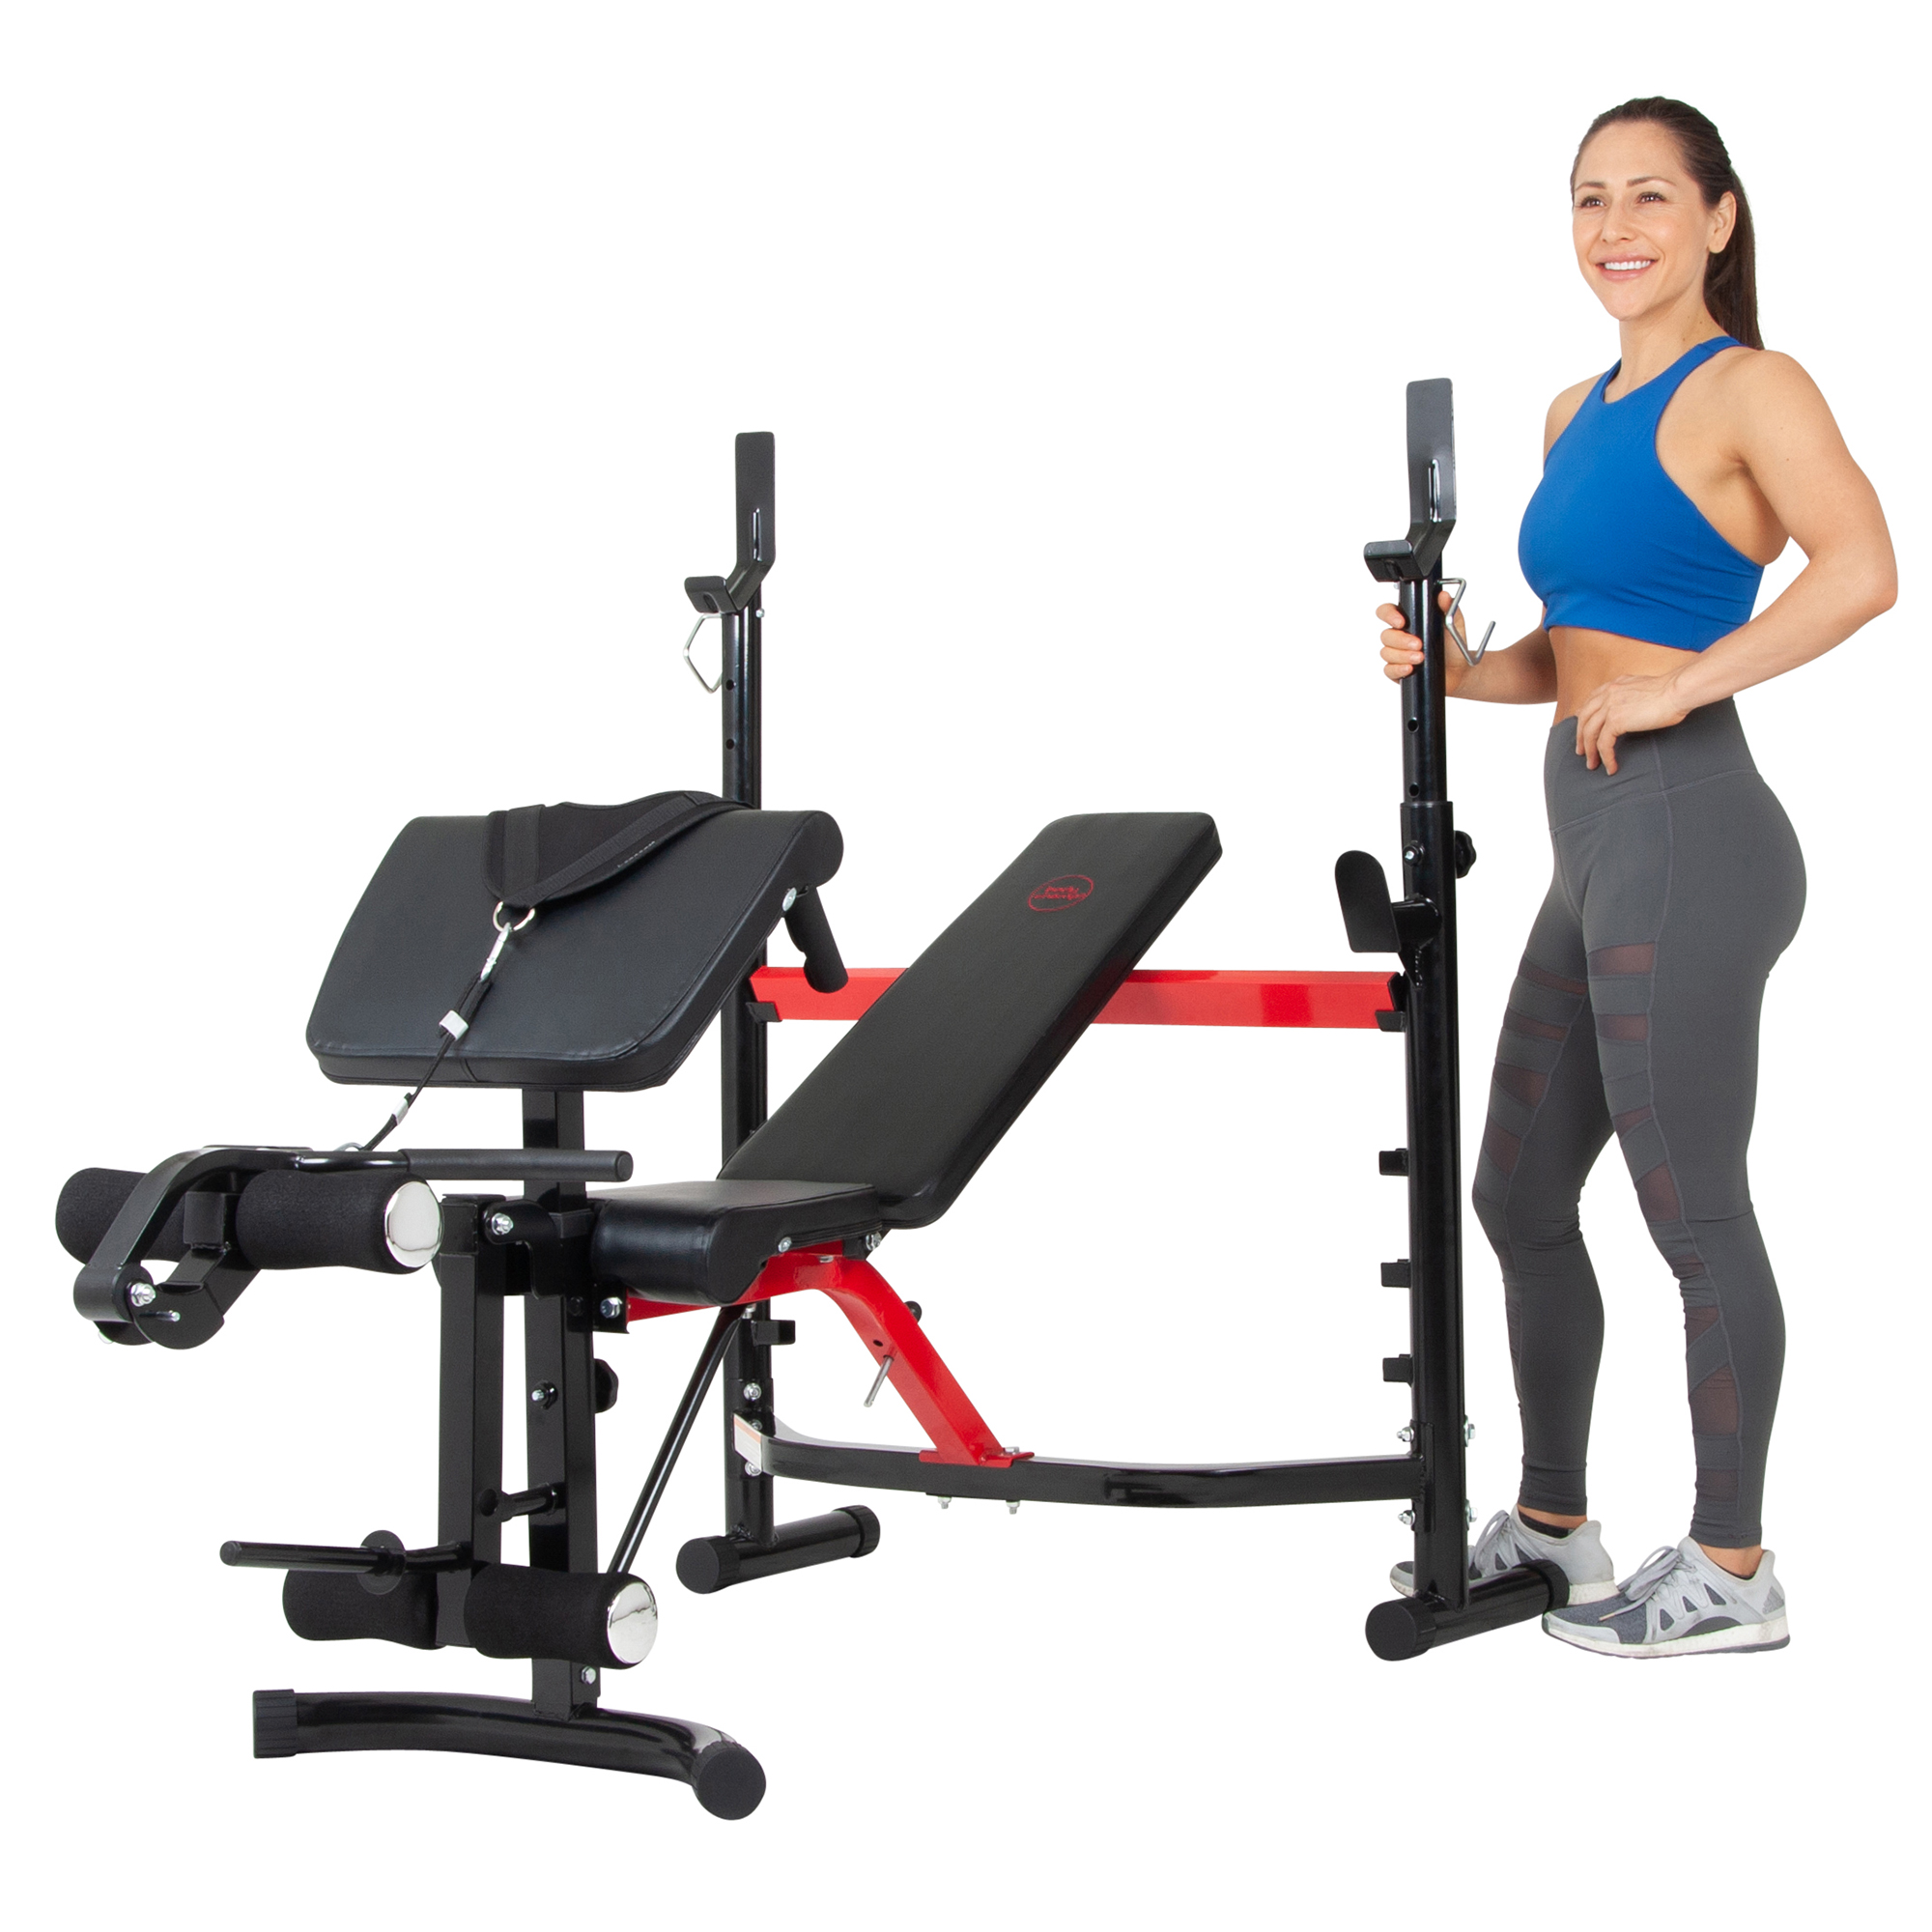 Body Champ BCB5268 Olympic Weight Bench with Arm Curl and Curl Bar Attachment, 300 Lbs. Weight Limit - image 2 of 10